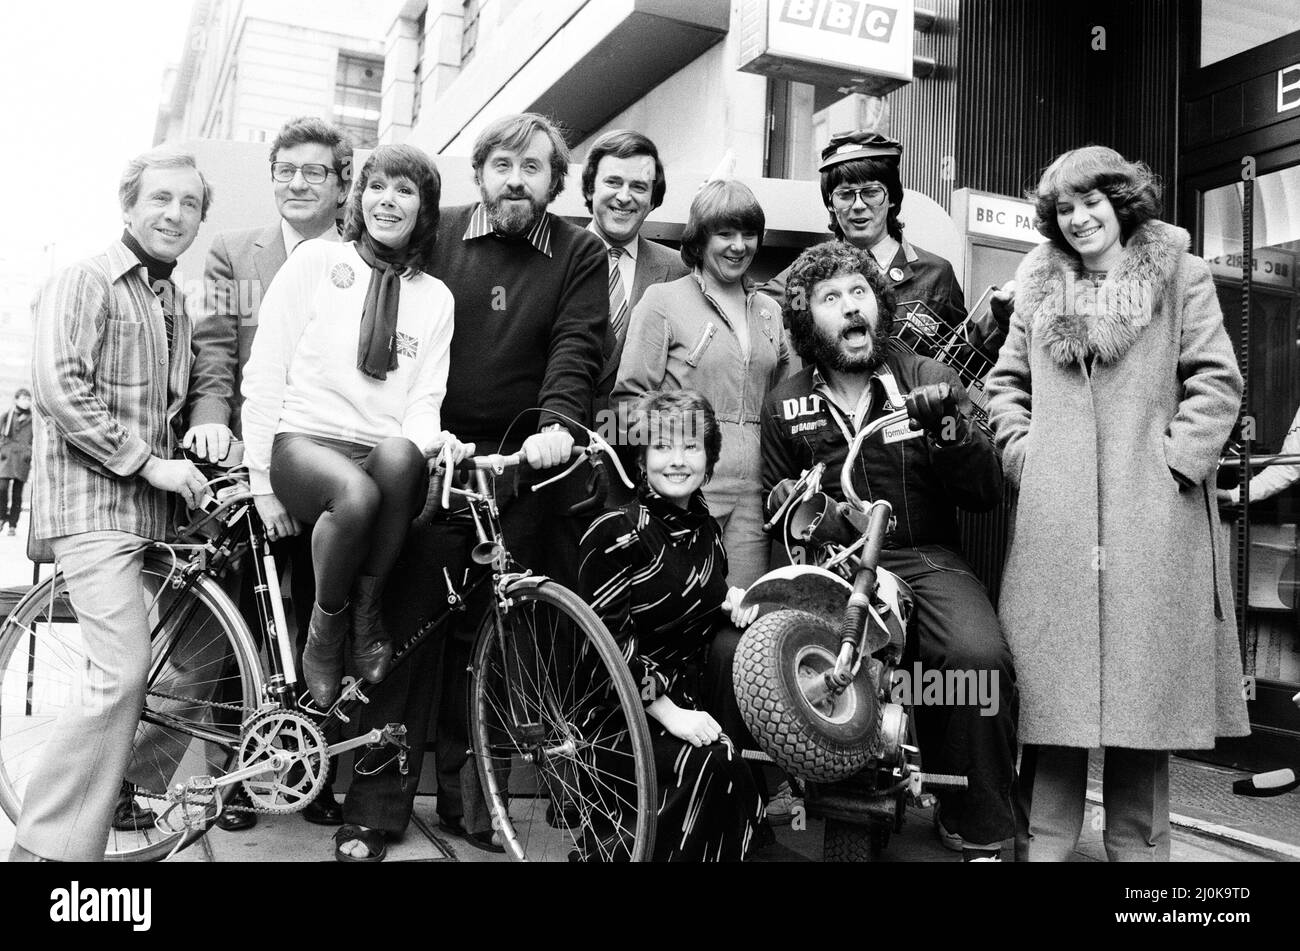 Photo-call with talent who will be appearing in BBC Radio Productions in 1981. Paris Studio, Lower Regent Street, London, 6th January 1981. DJ's pictured includes, Terry Wogan, Dave Lee Travis, Mike Reid & Judy Carne. Stock Photo